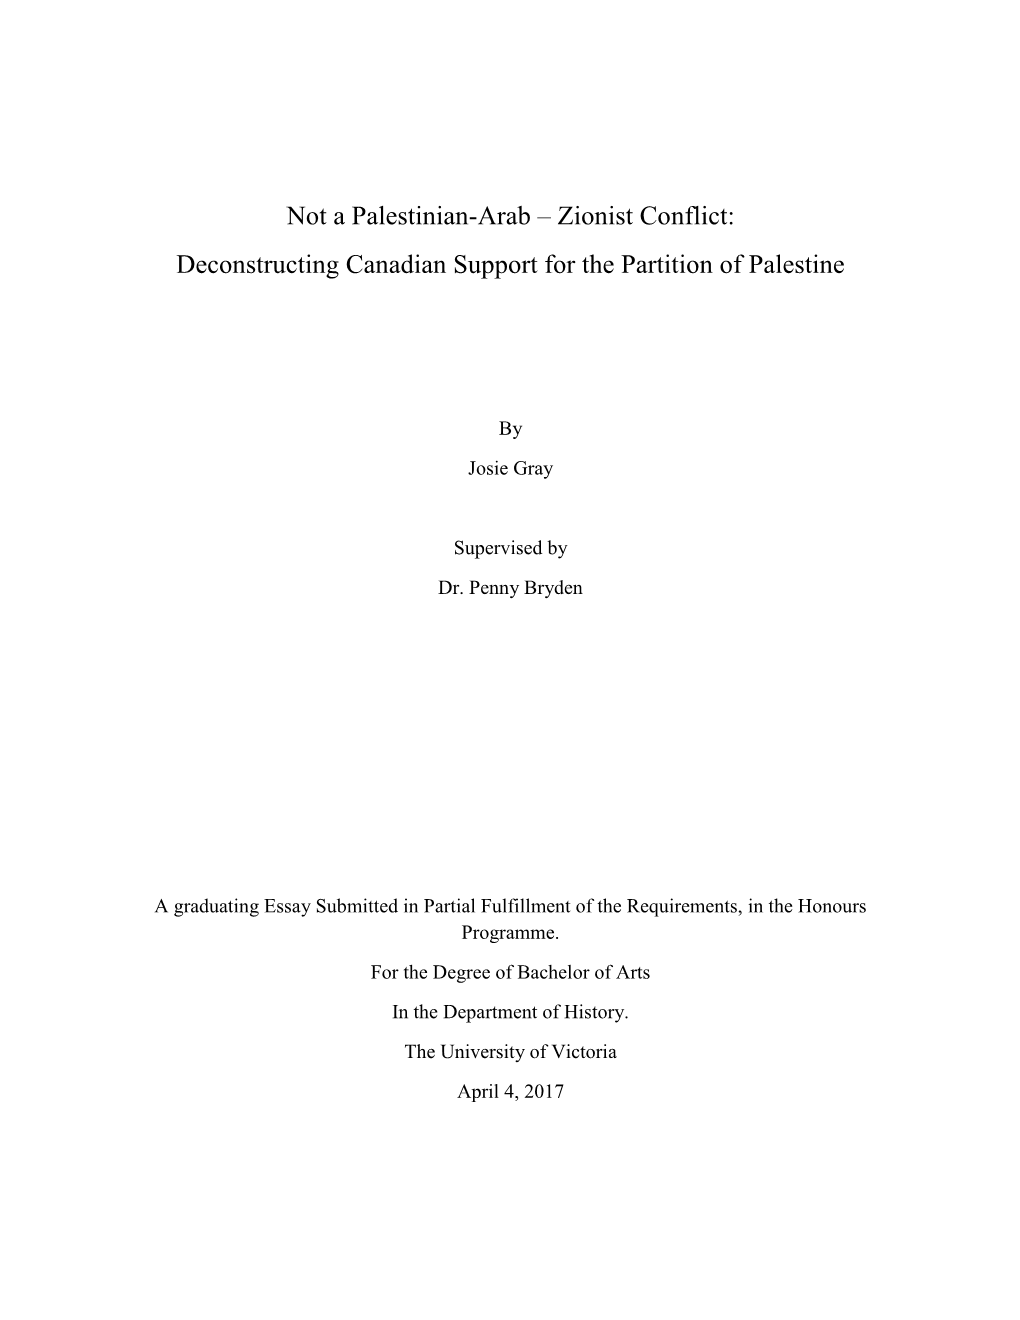 Not a Palestinian-Arab – Zionist Conflict